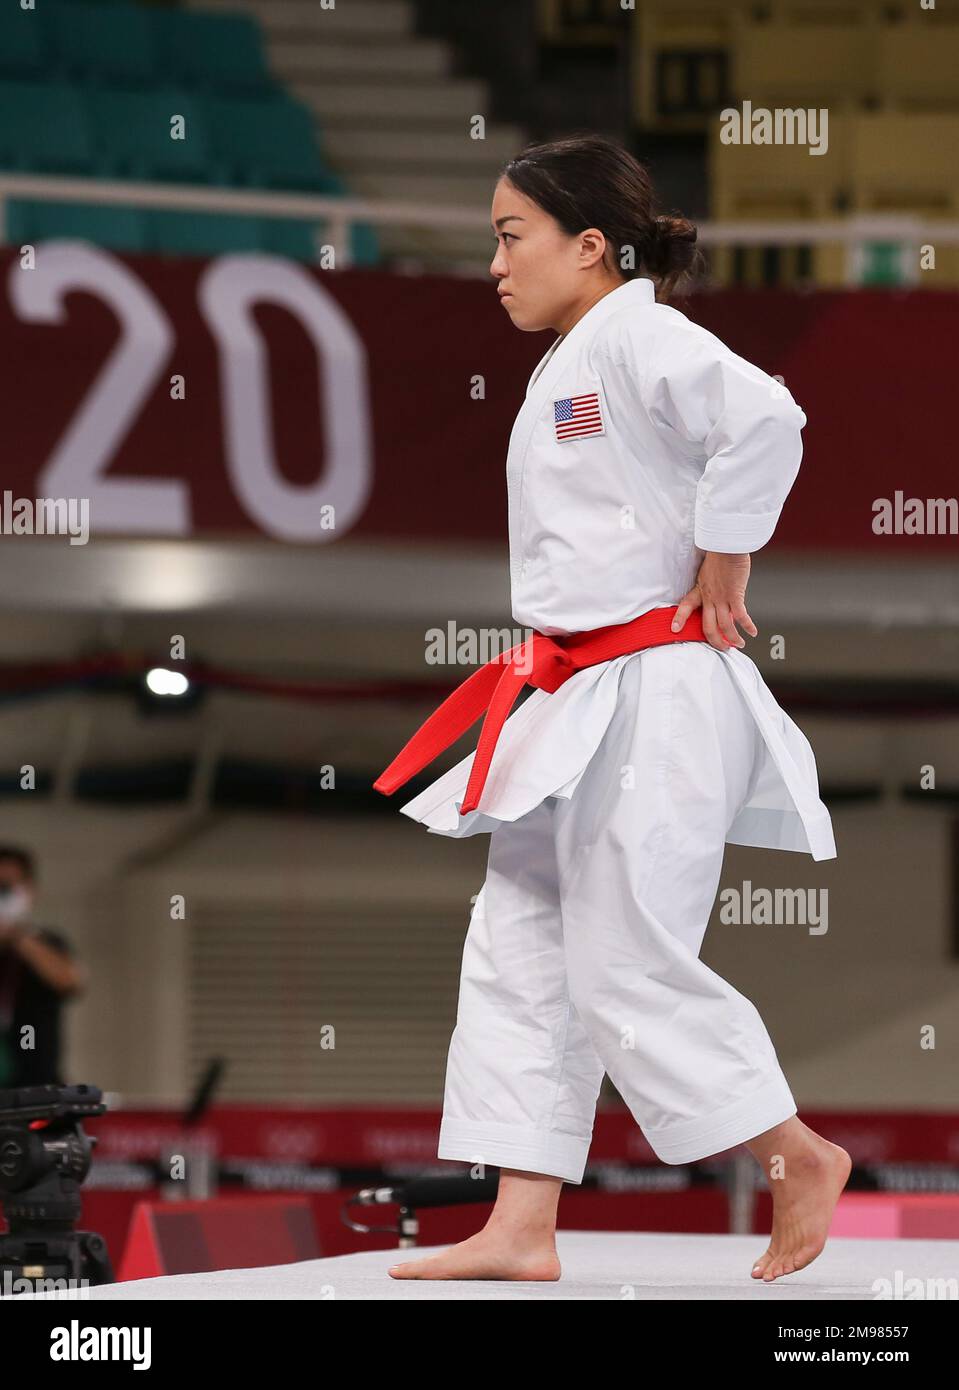 AUG 5, 2021 - TOKYO, JAPAN: Sakura KOKUMAI of United States competes in the Women's Kata Elimination Round at the Tokyo 2020 Olympic Games (Photo by Mickael Chavet/RX) Stock Photo